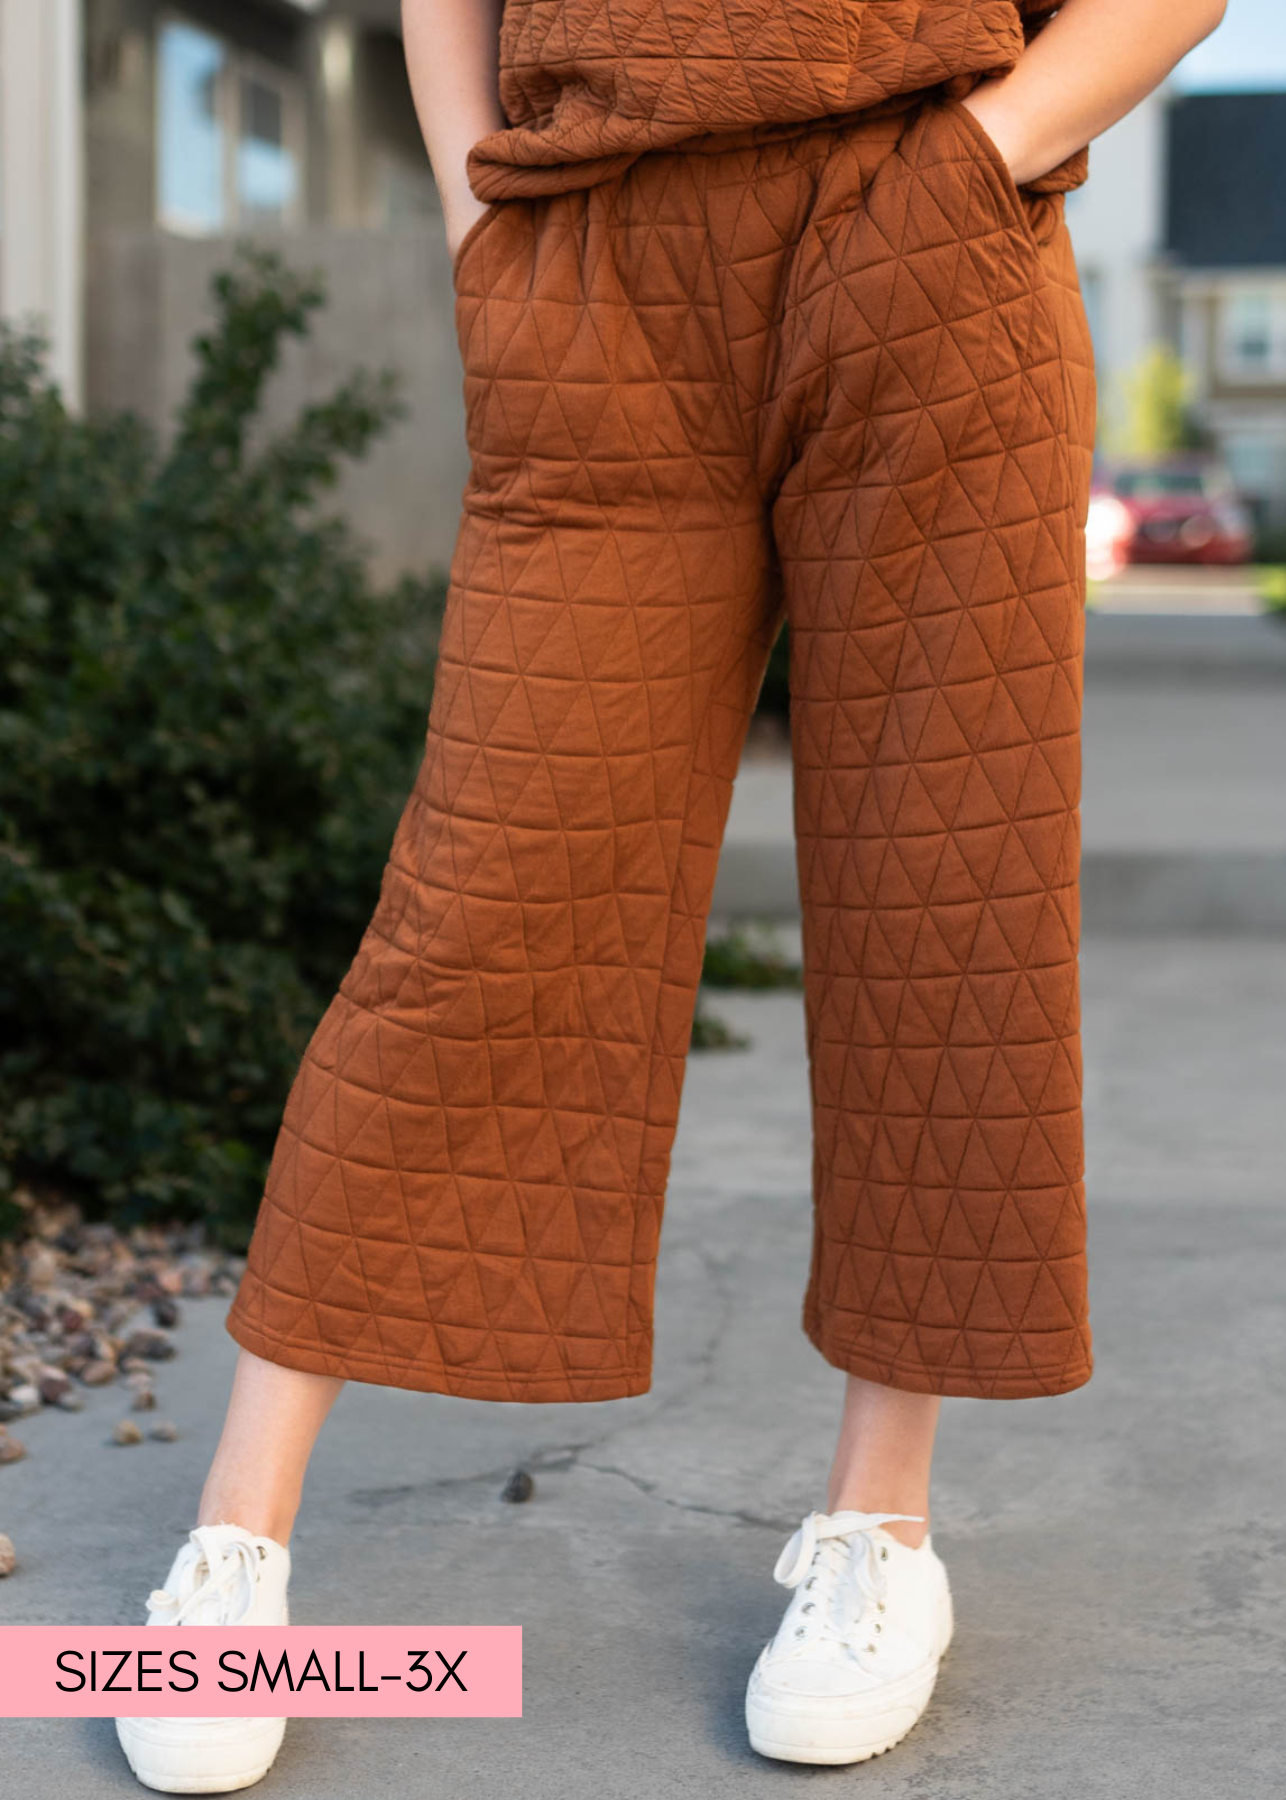 Quilted cinnamon pants